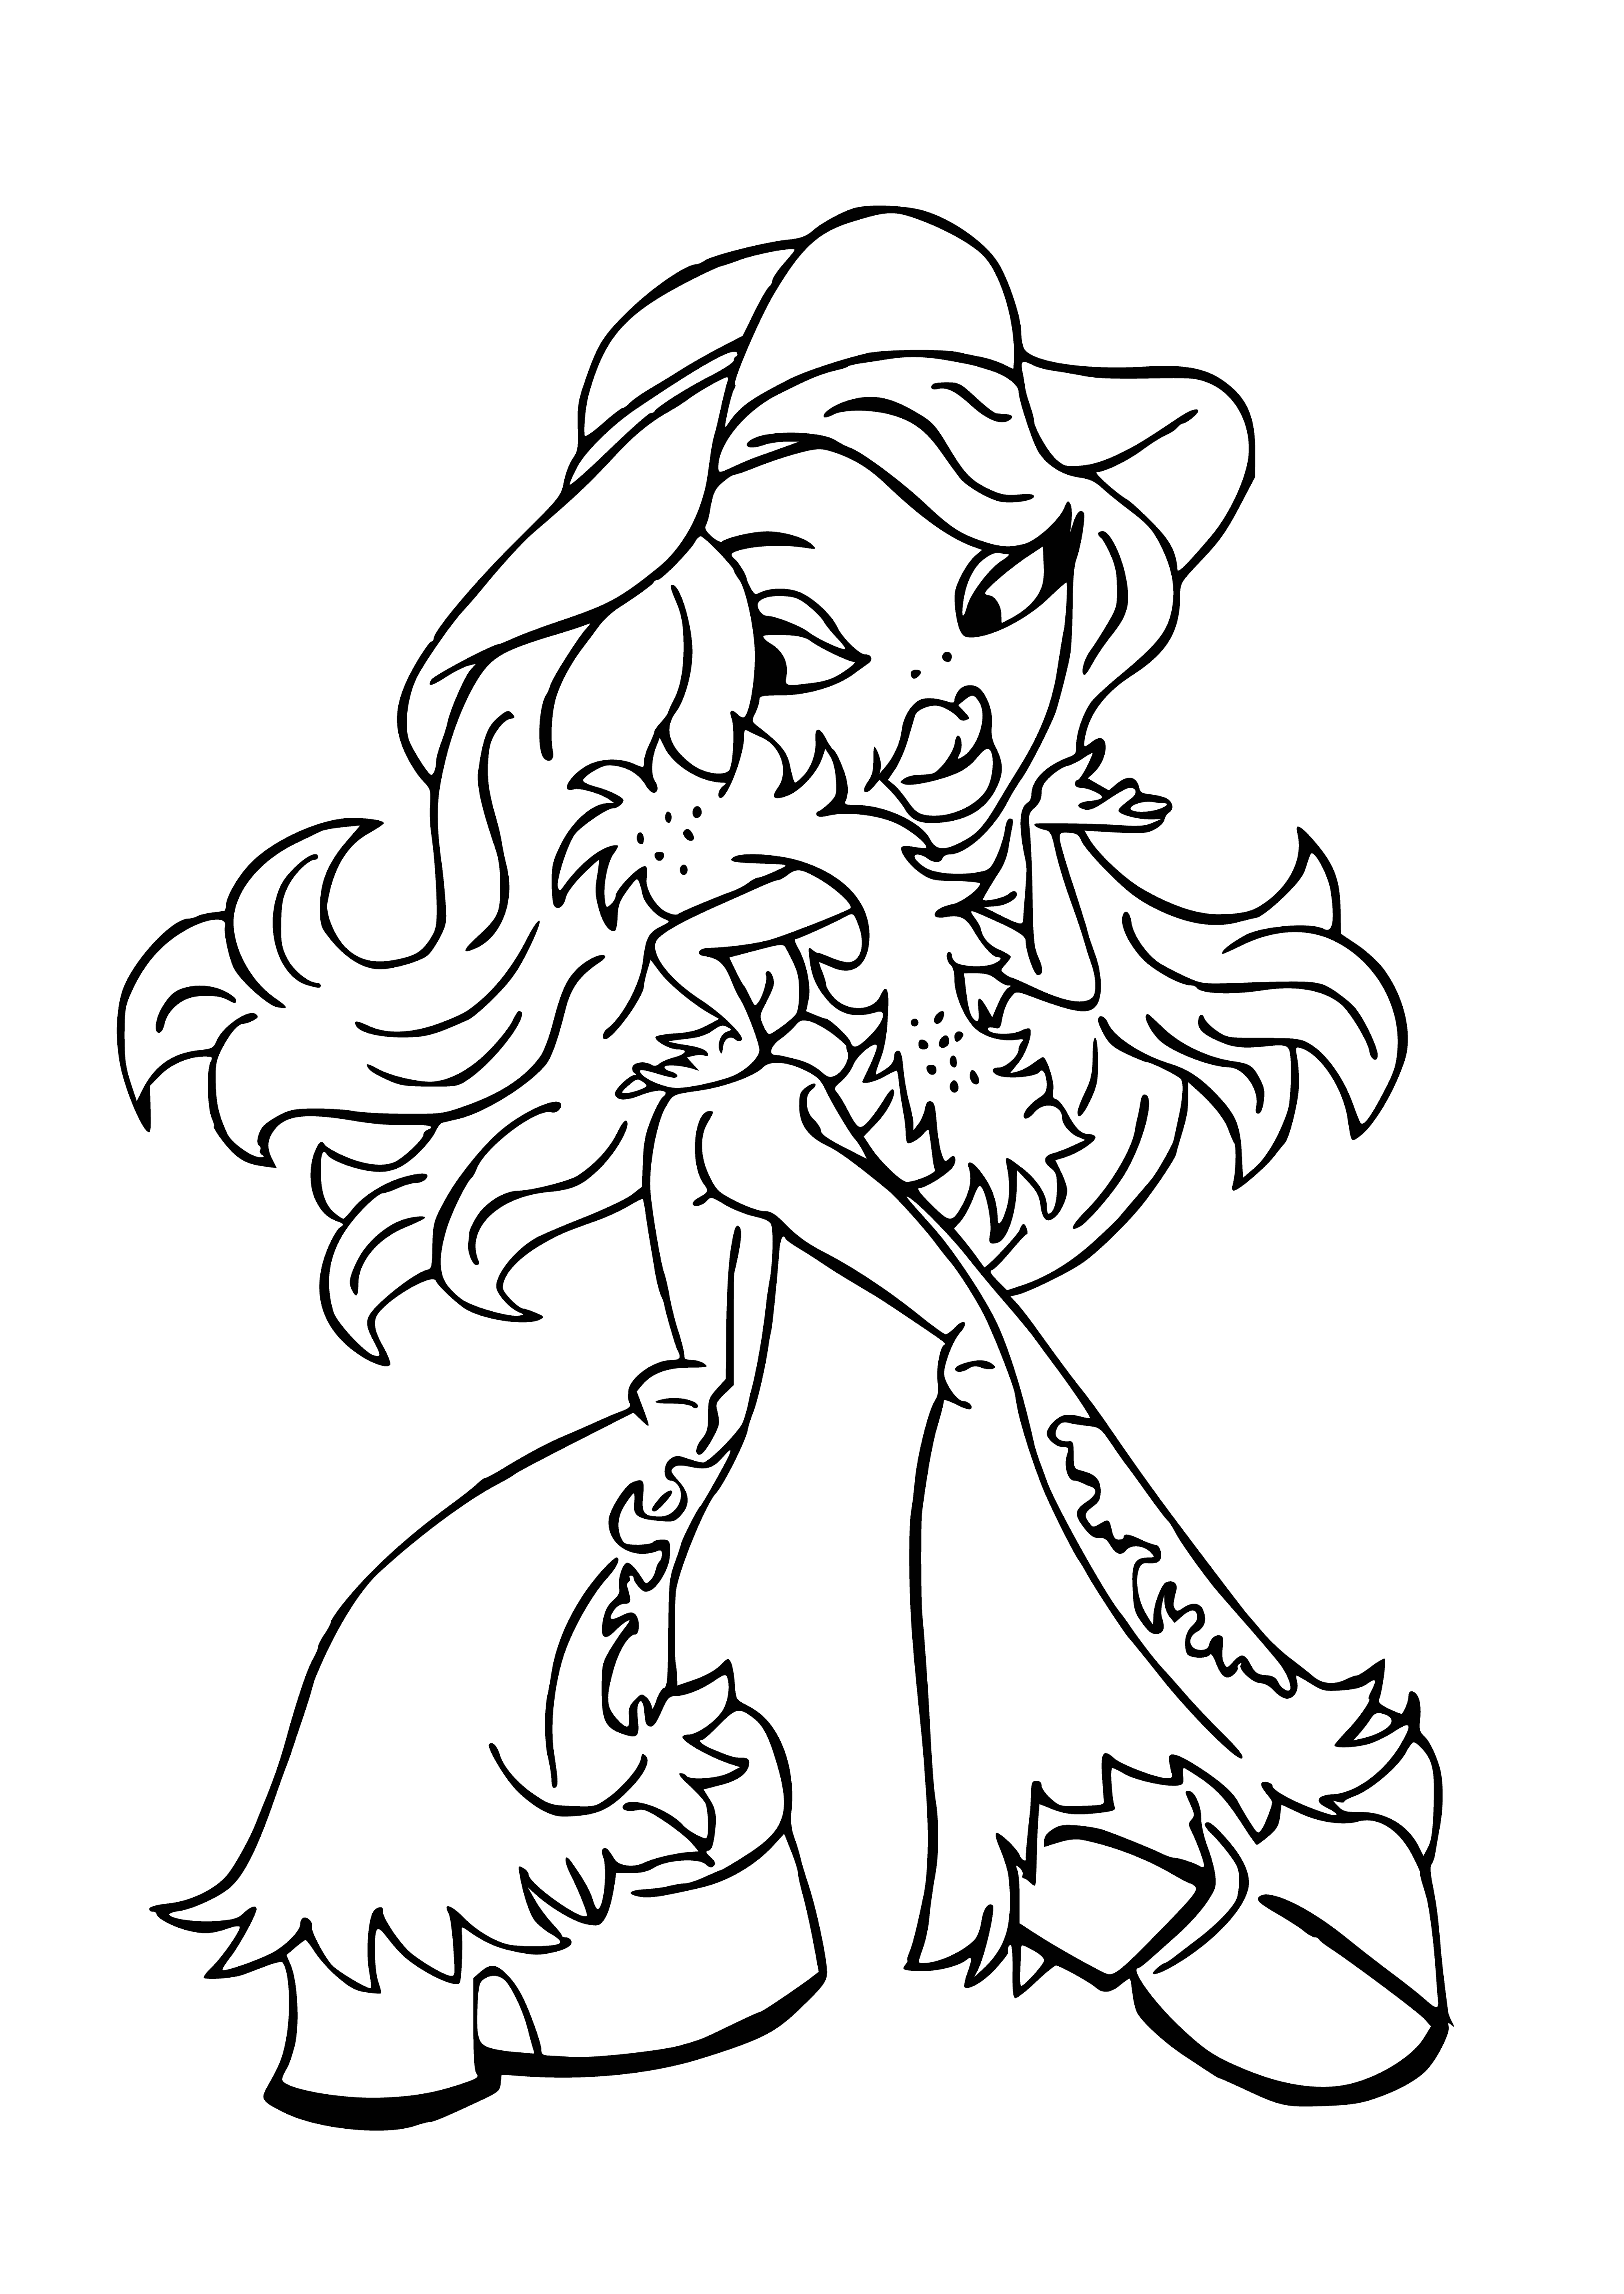 coloring page: Two large dolls in makeup & jewelry standing in front of a school locker, one with a pink & black skirt, the other with a purple & black skirt.